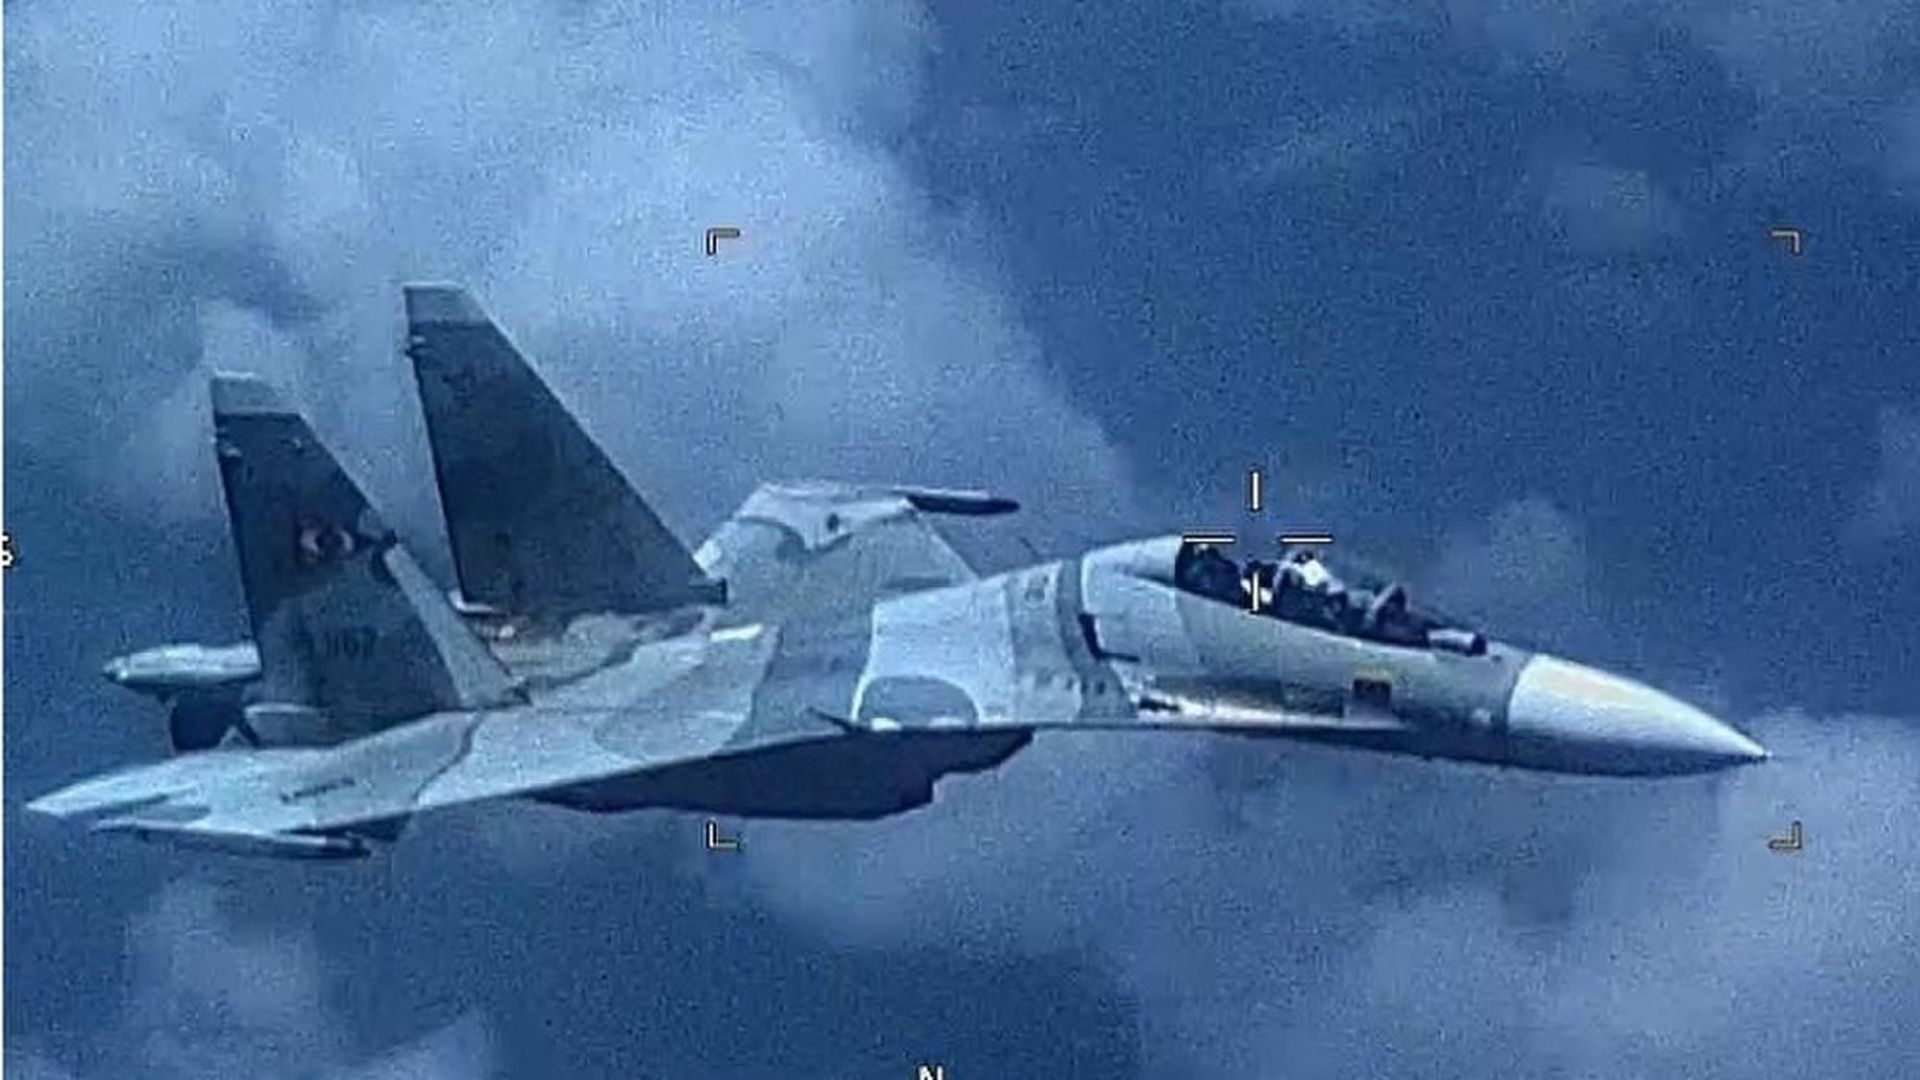 United States Southern Command image of the Venezuelan fighter jet.